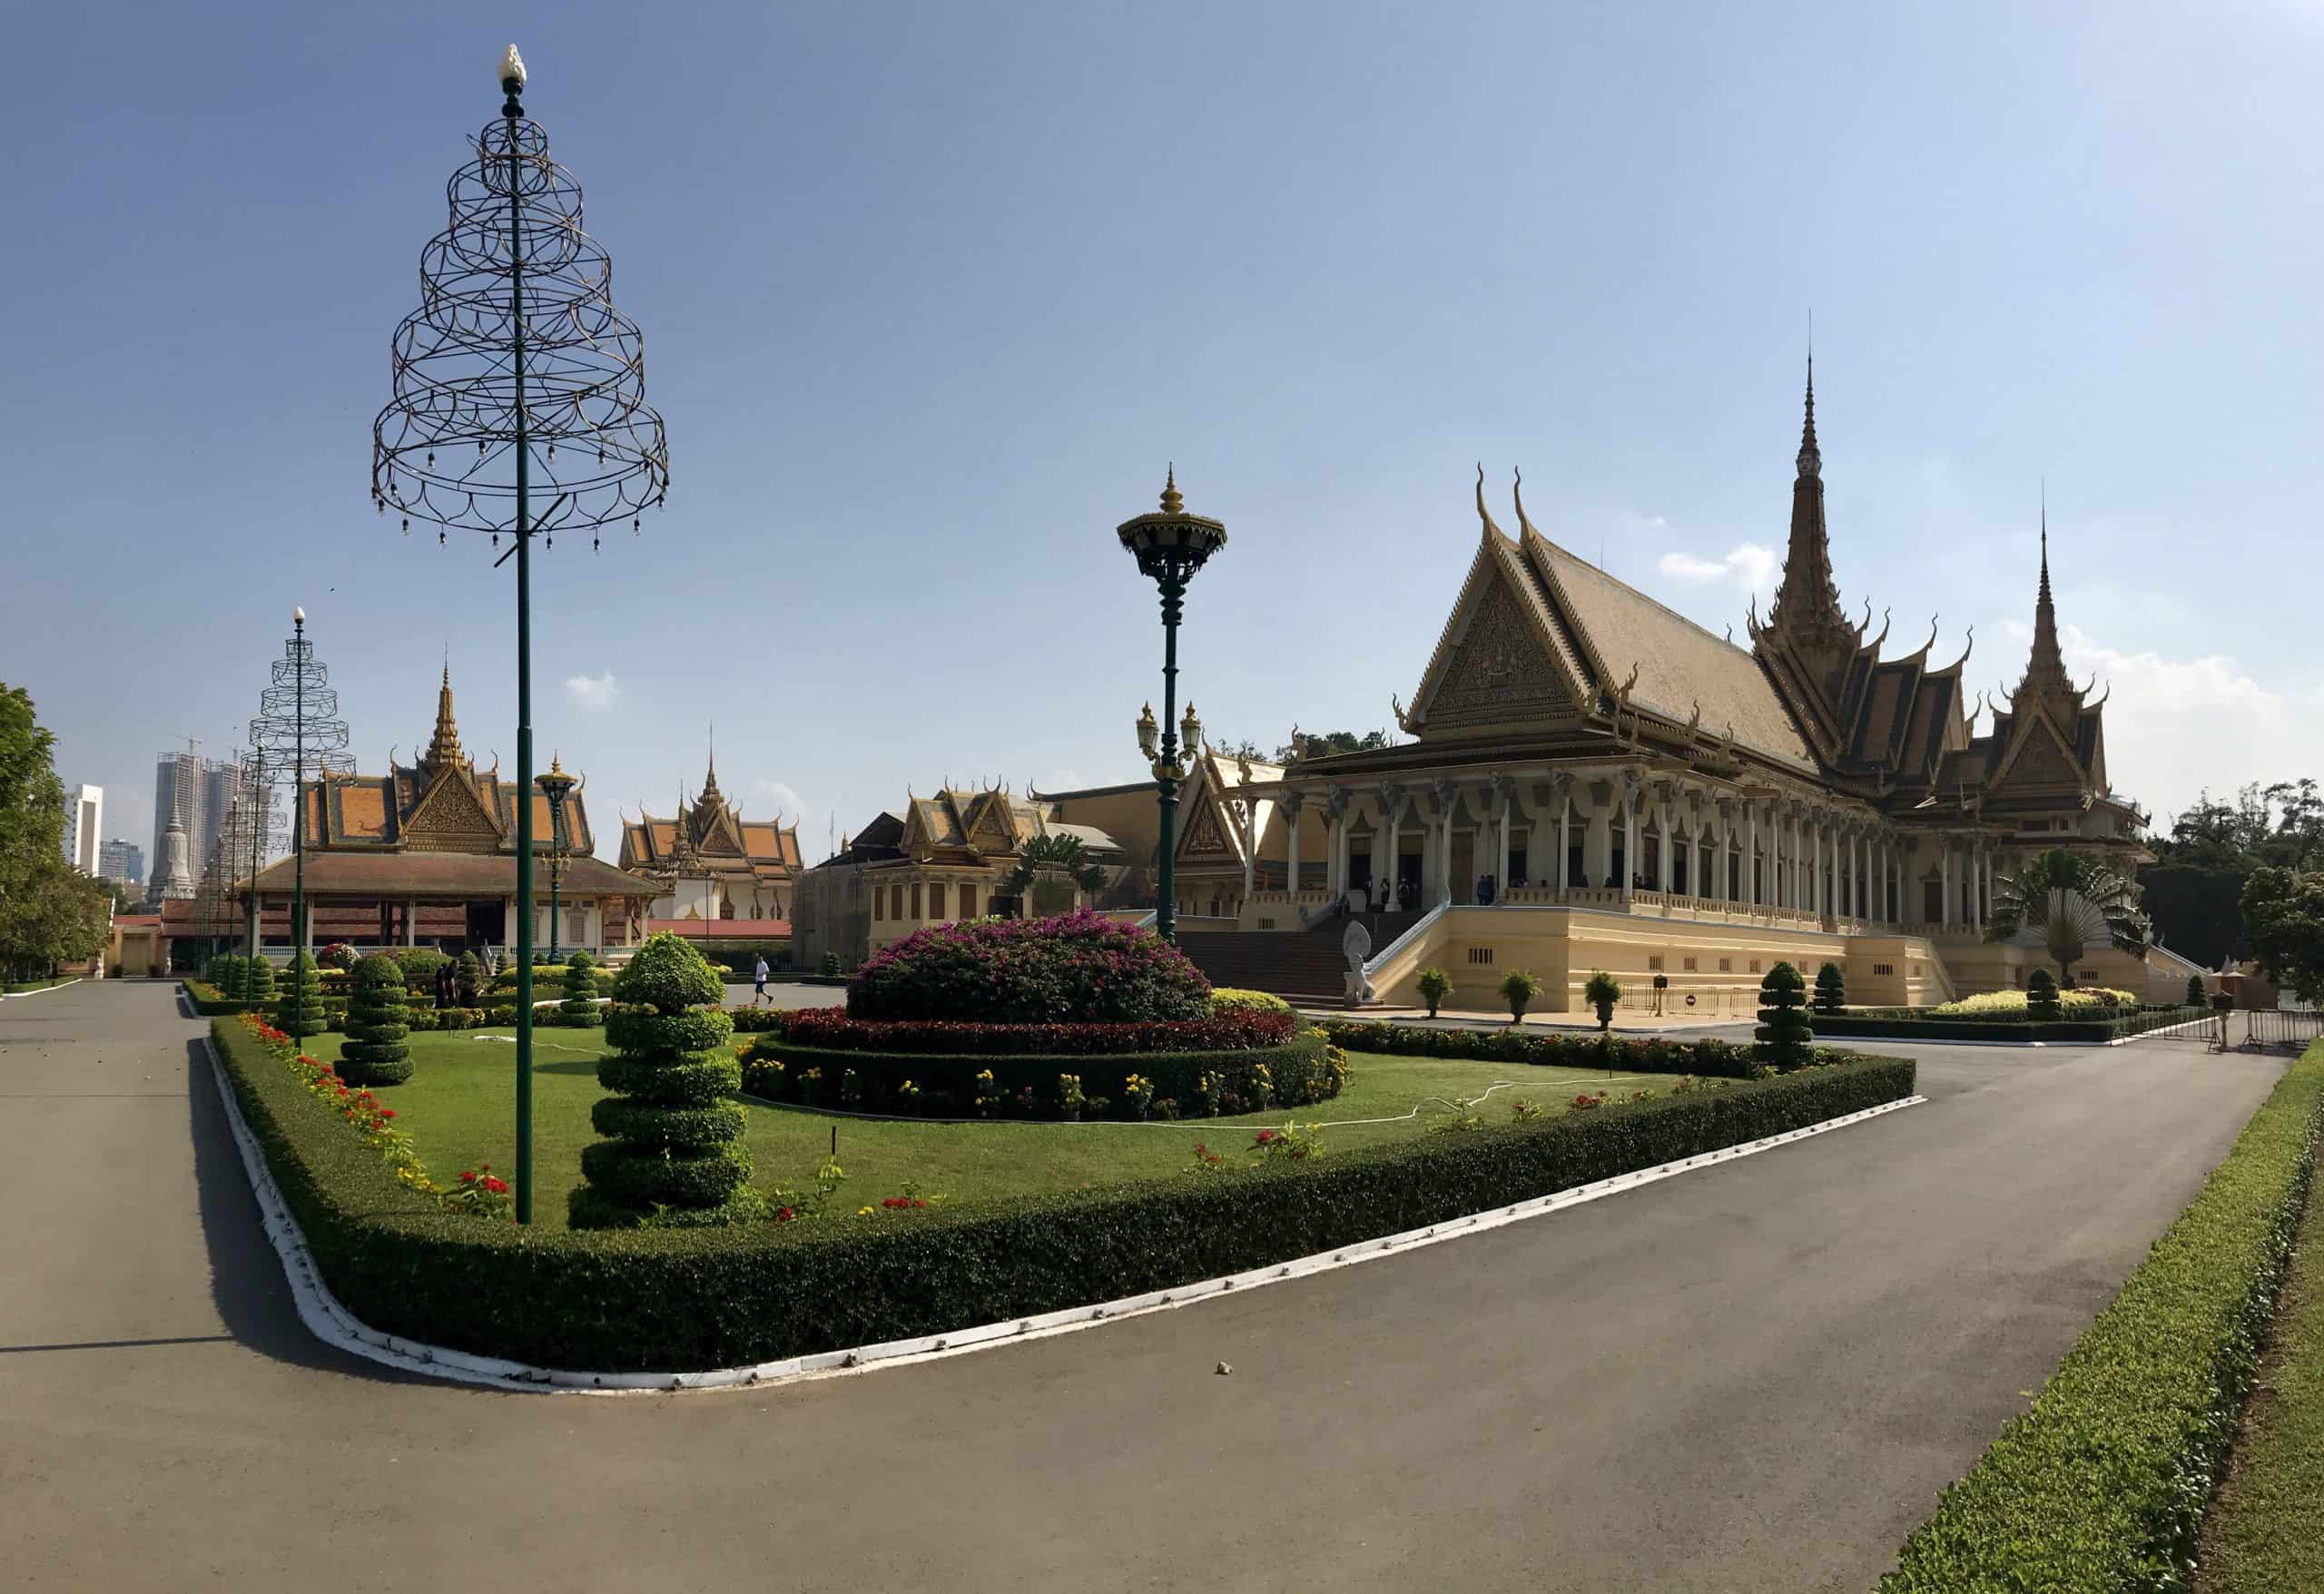 Visiting the Royal Palace is a top thing to do in Phnom Penh Cambodia